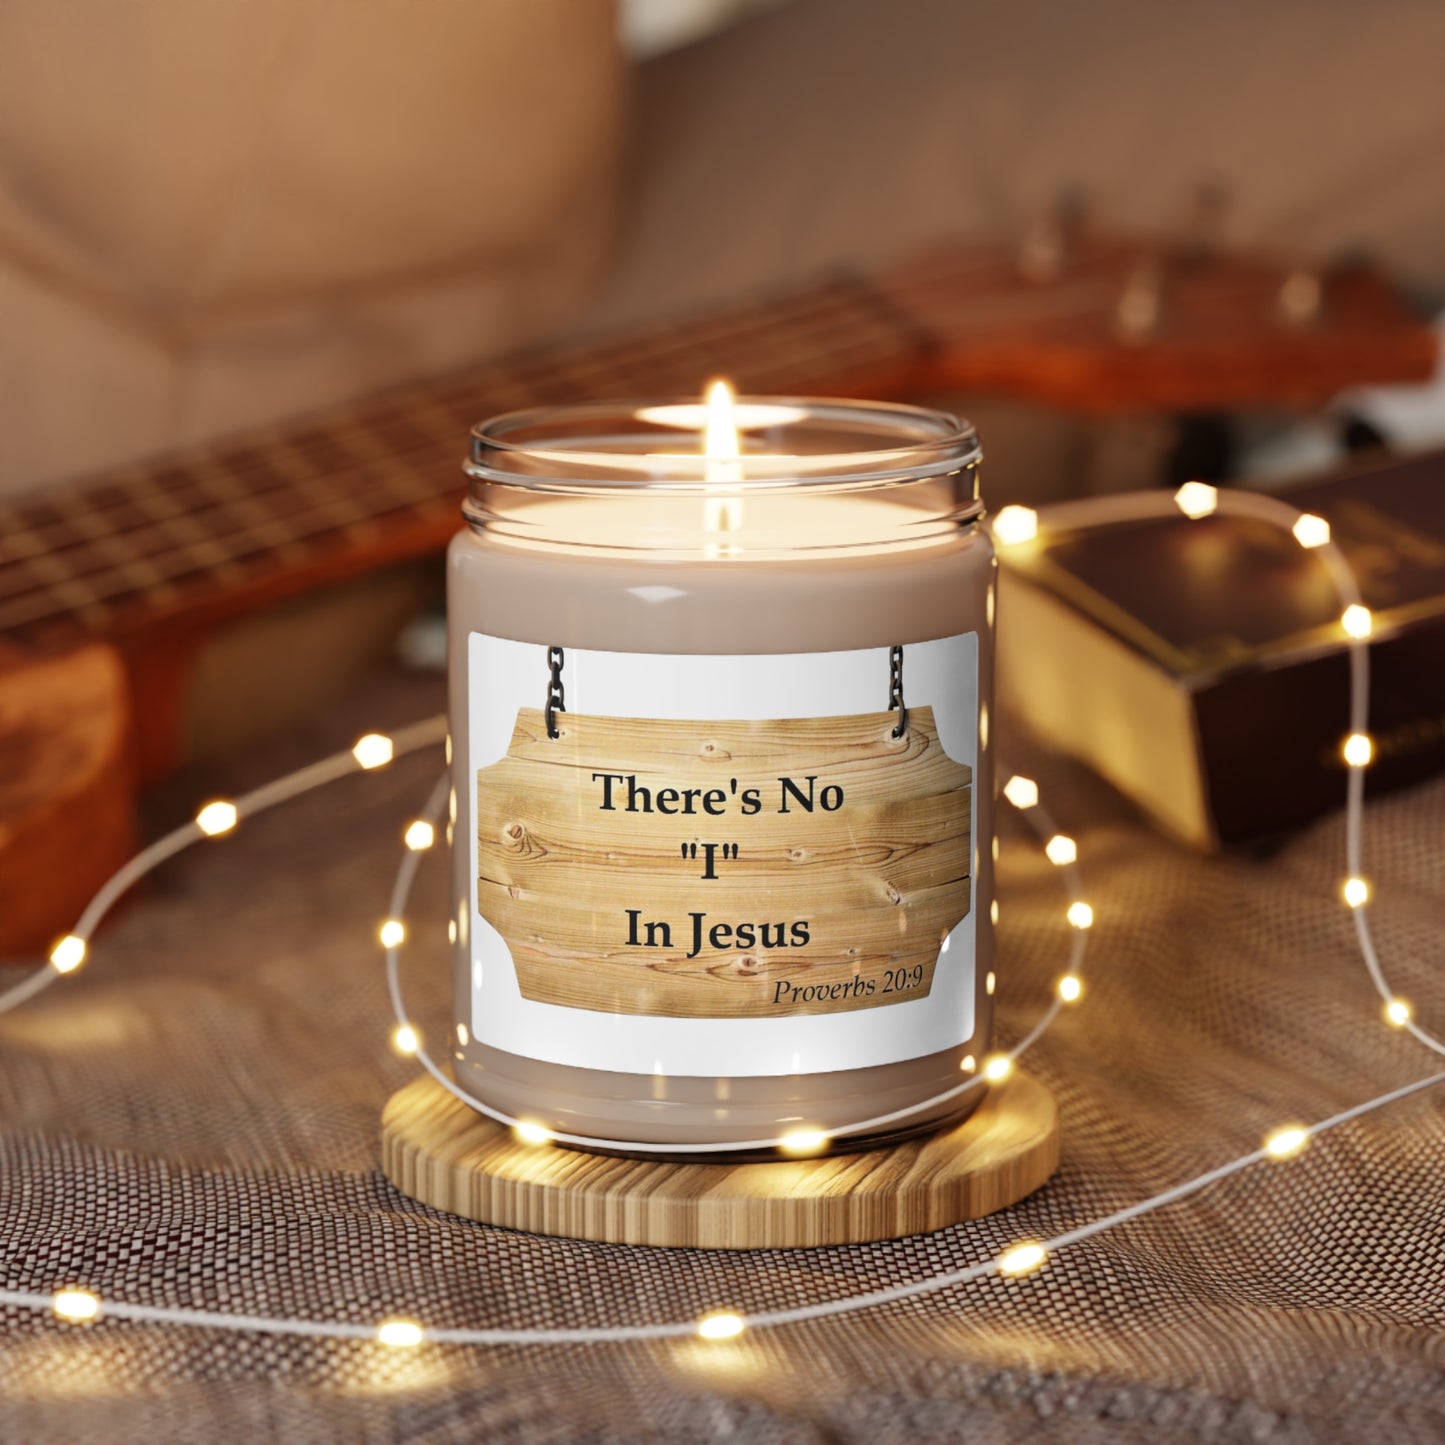 Bible Verse Candles - 100% Soy Wax Scented Candle with Inspirational Message | Assembled in the USA,Assembled in USA,Bio,Decor,Eco-friendly,Halloween,Holiday Picks,Home & Living,Home Decor,Made in the USA,Made in USA